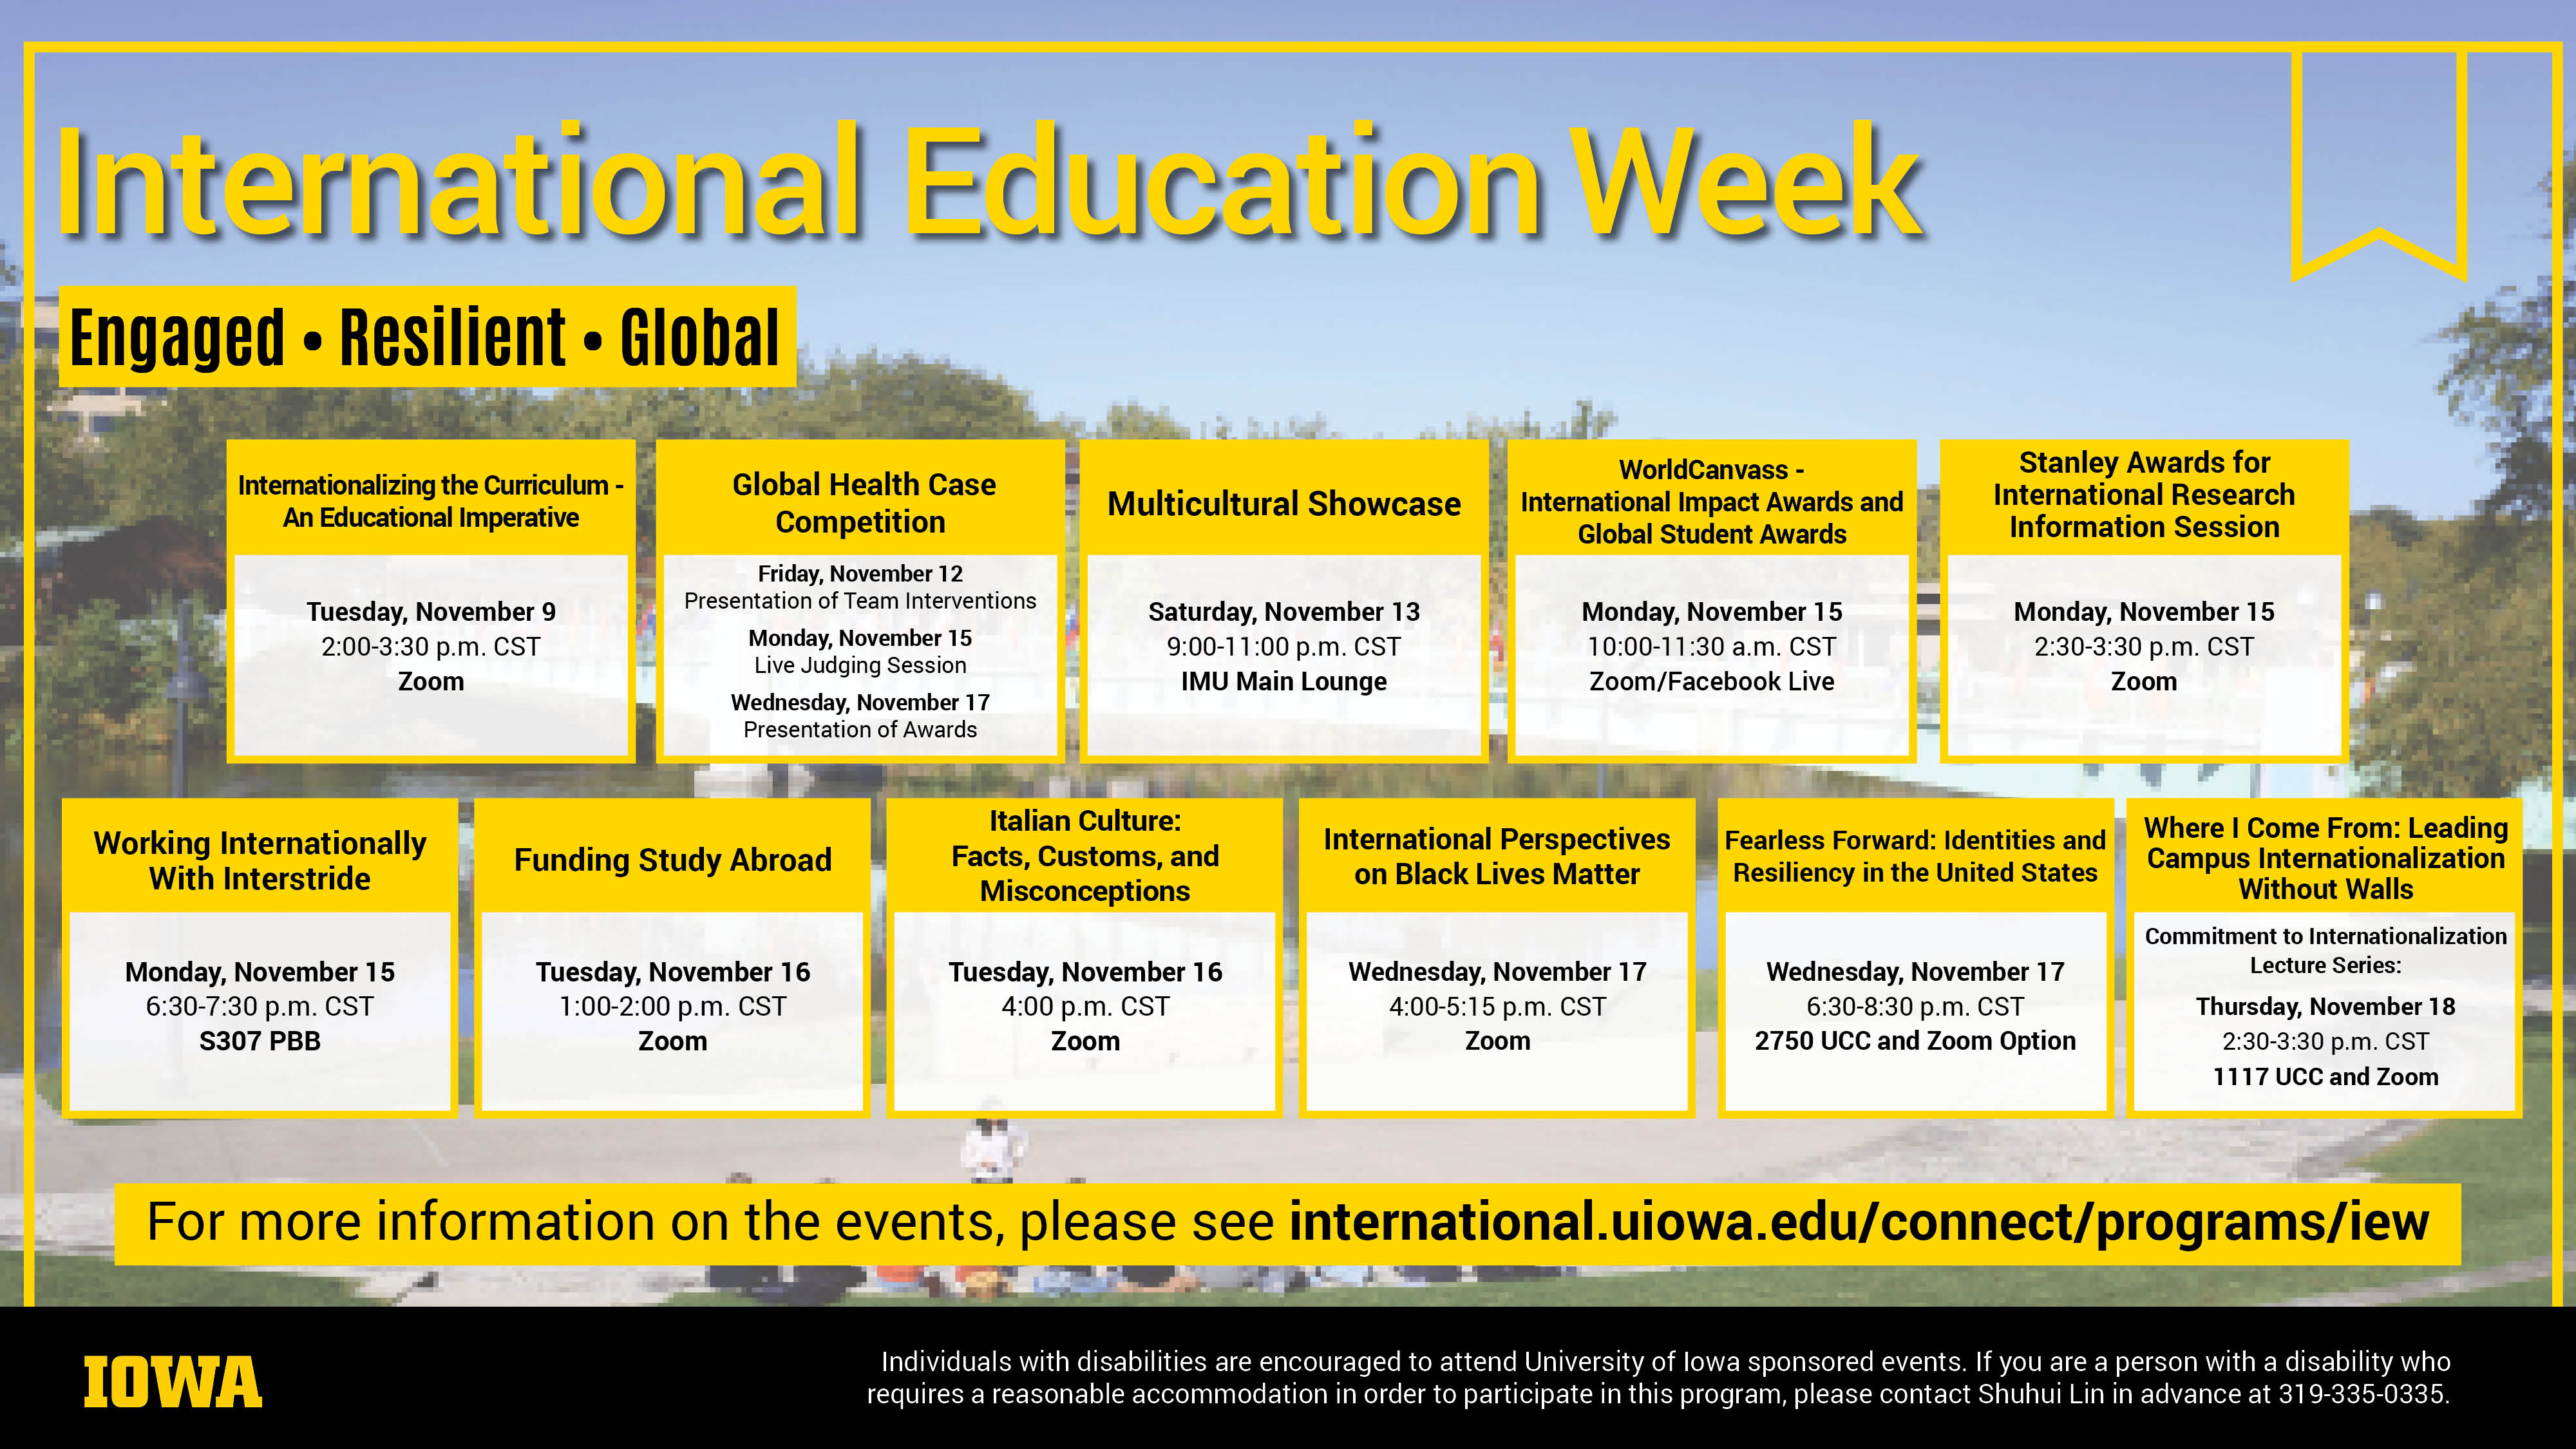 International Education Week schedule of events. Yellow blocks lined up, each block has information about an event.